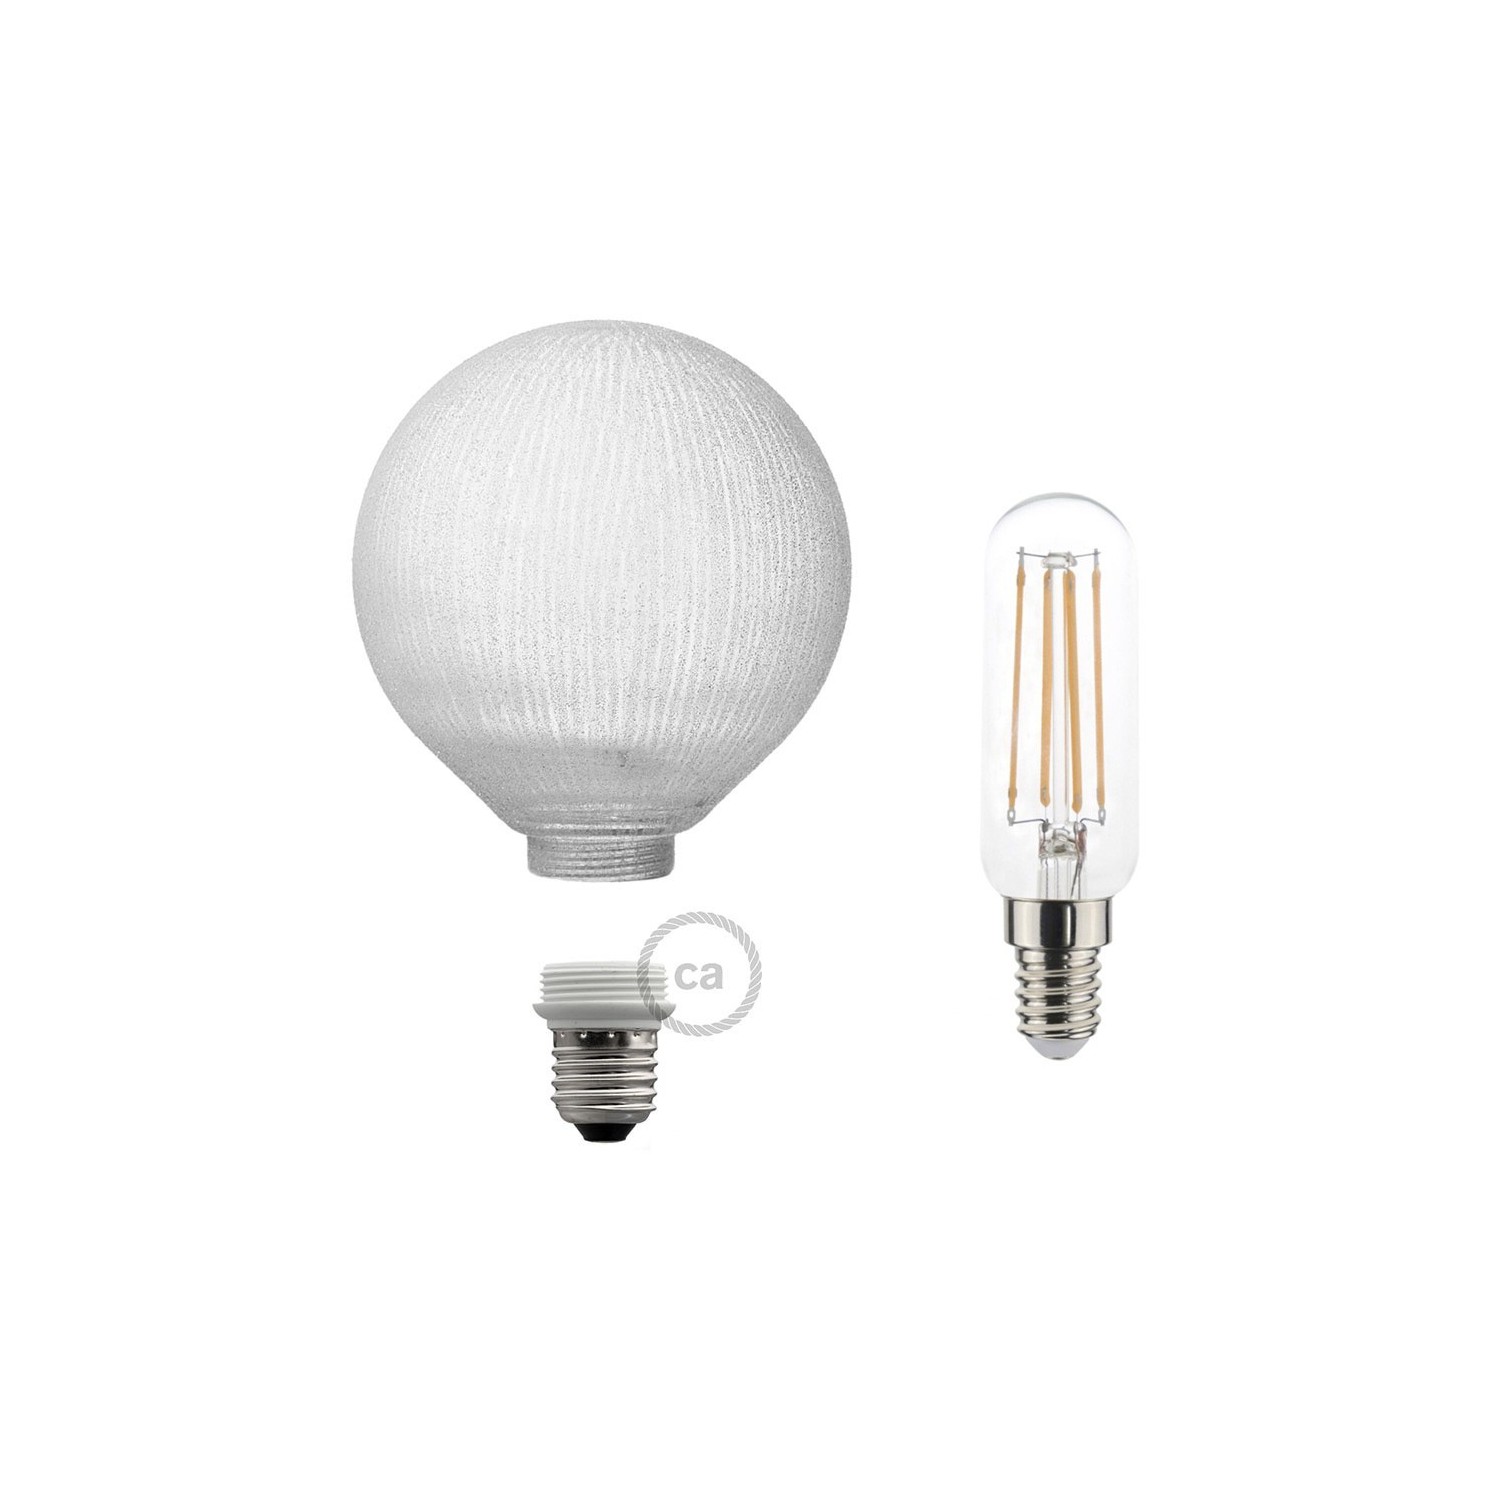 Modular LED Decorative Light bulb White with vertical lines 4,5W E27 Dimmable 2700K